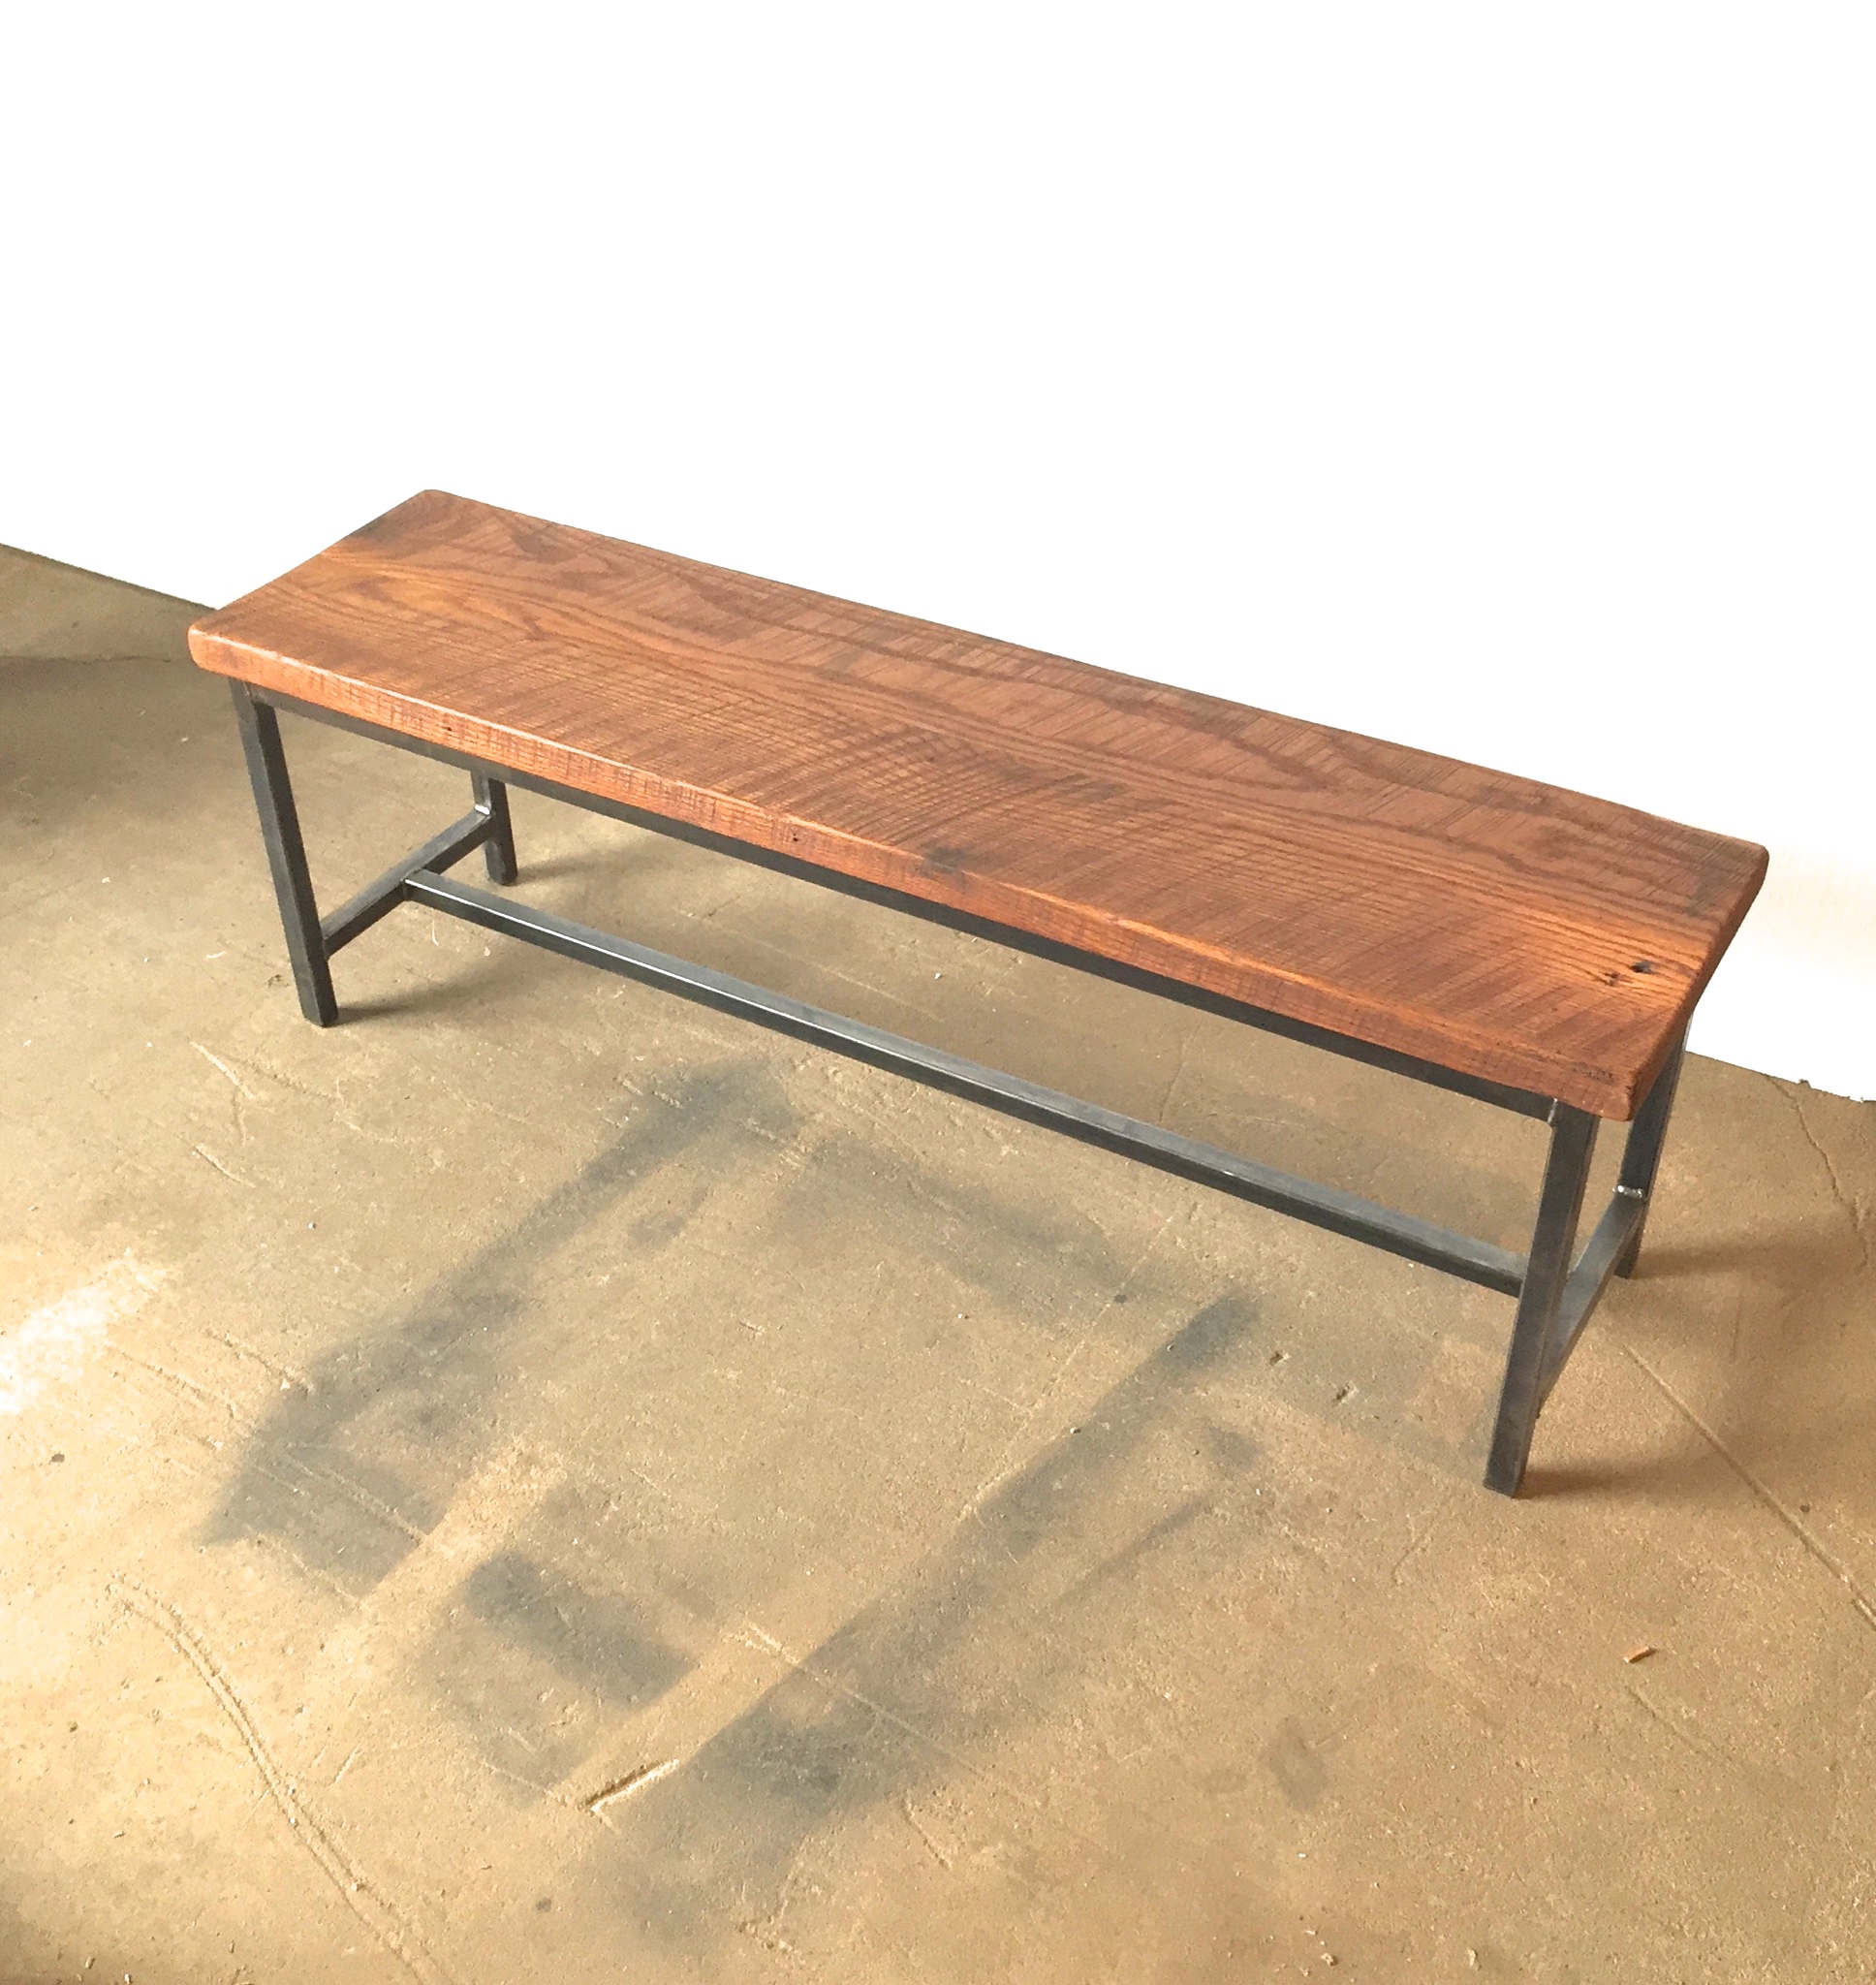 Stoic Reclaimed Wood Bench Industrial Entryway Bench What We Make